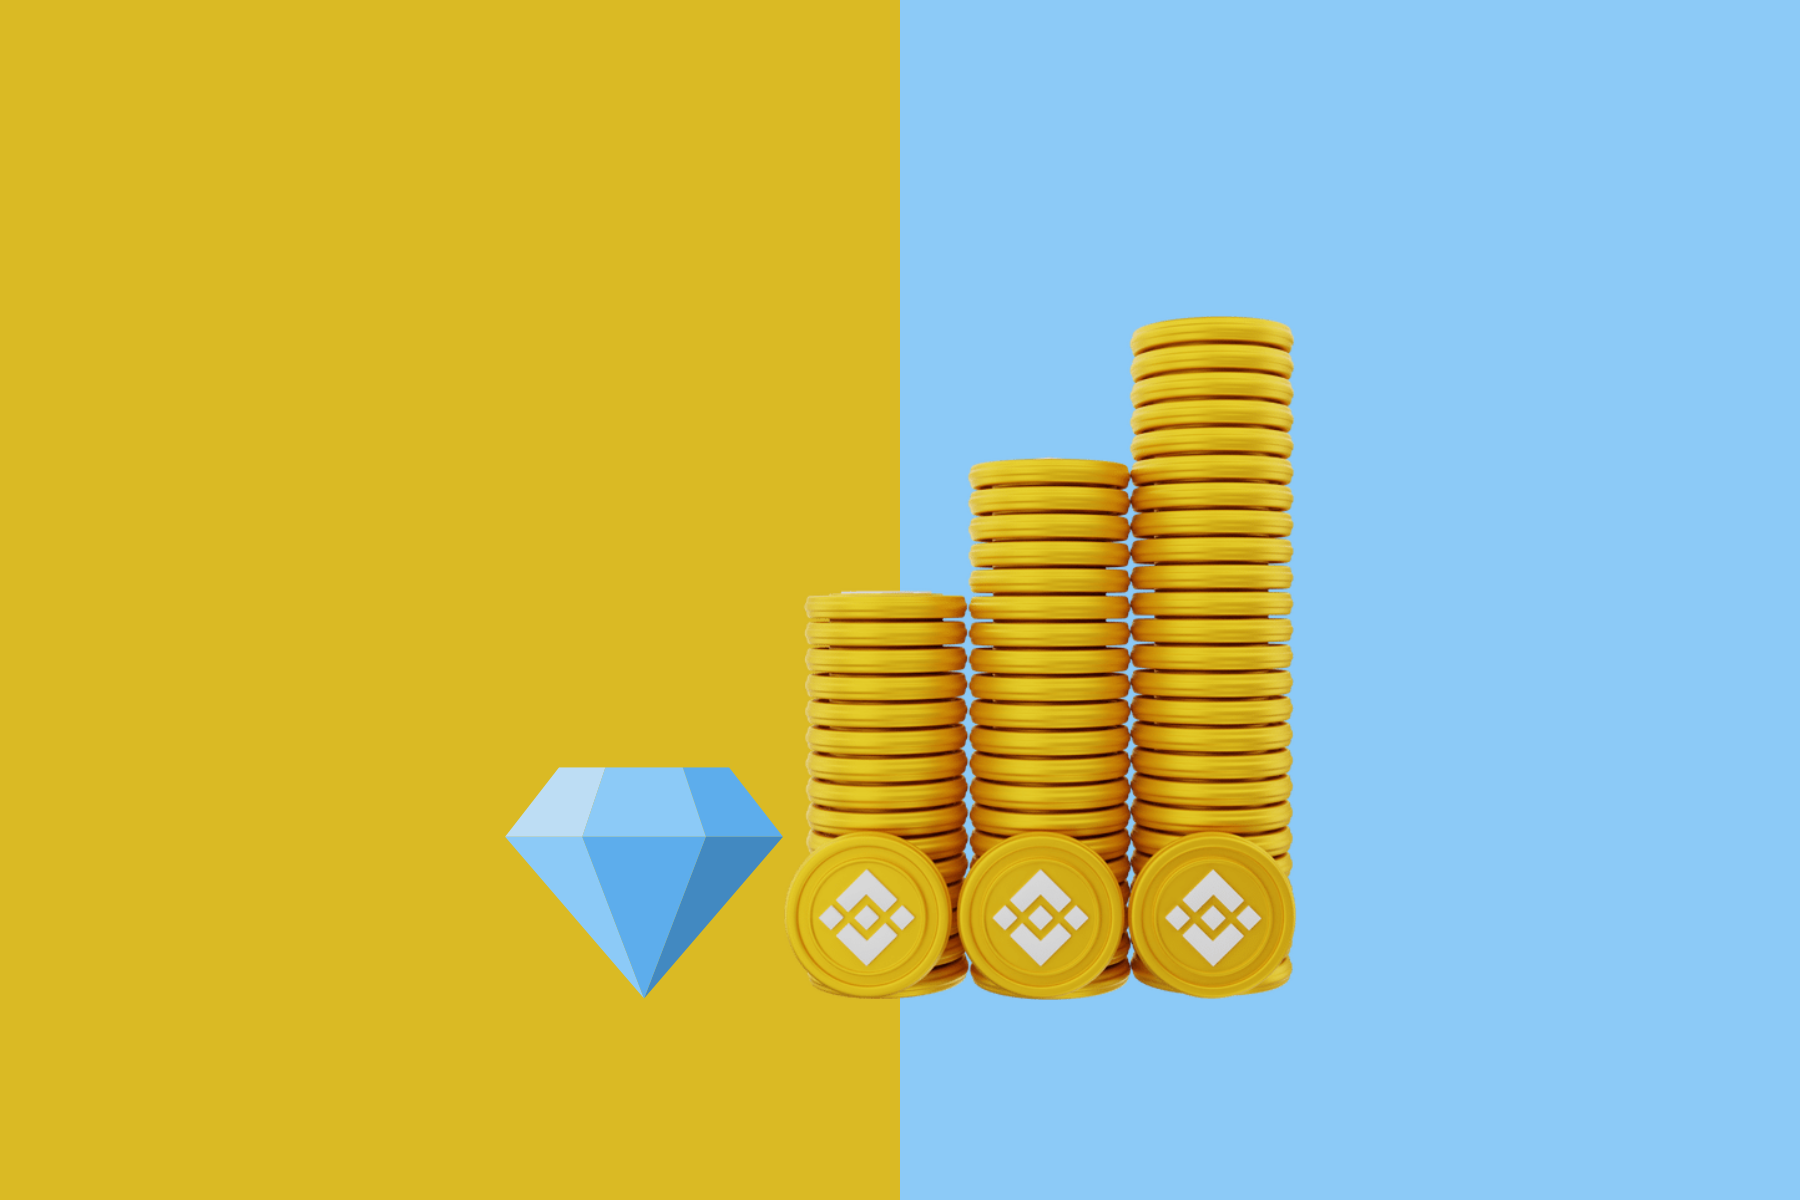 A blue gem next to a stack of tall Binance coins